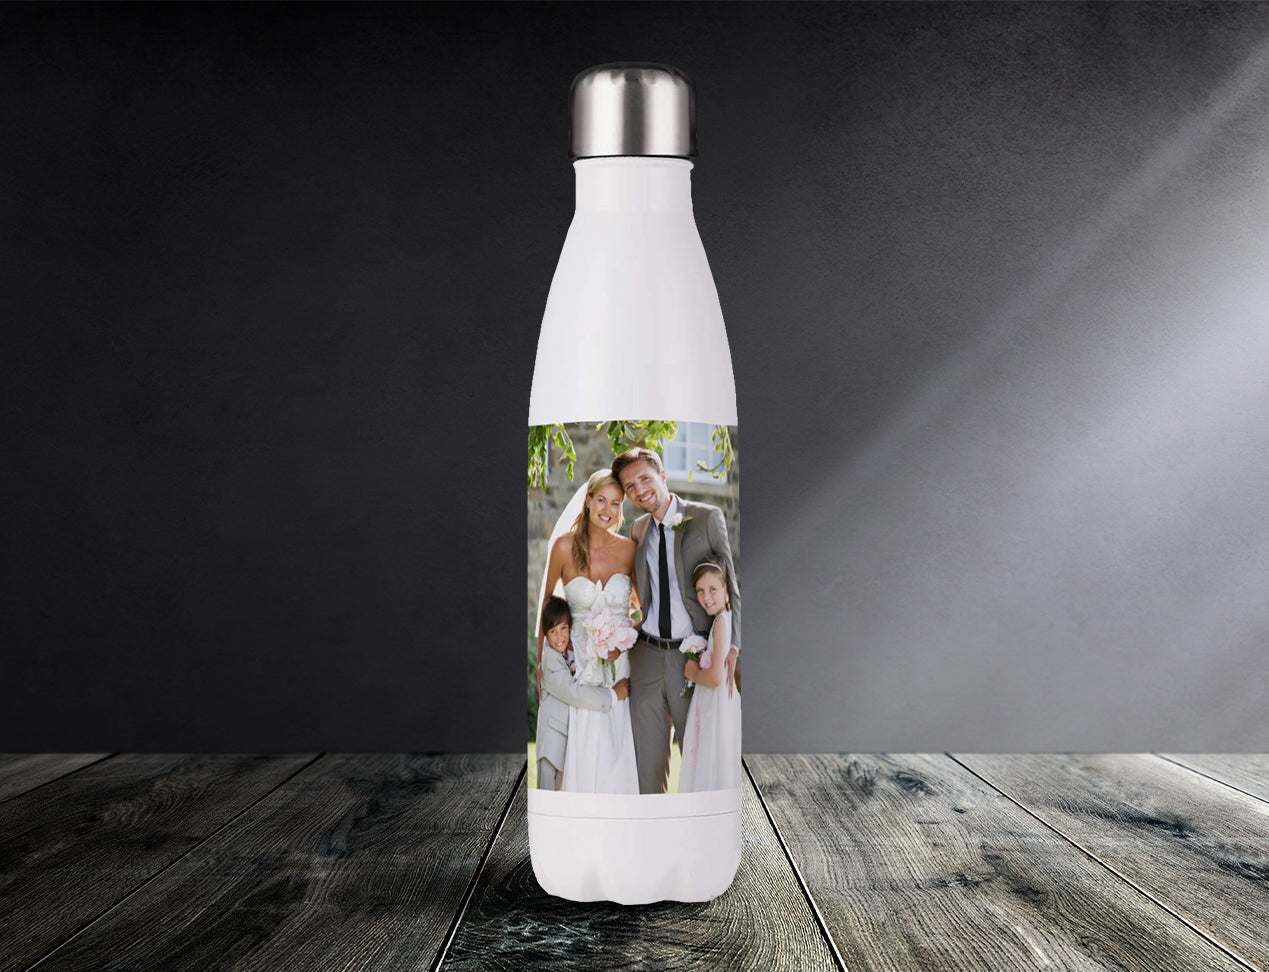 Personalised Water Bottles - customised with wedding photo is standing on a table.